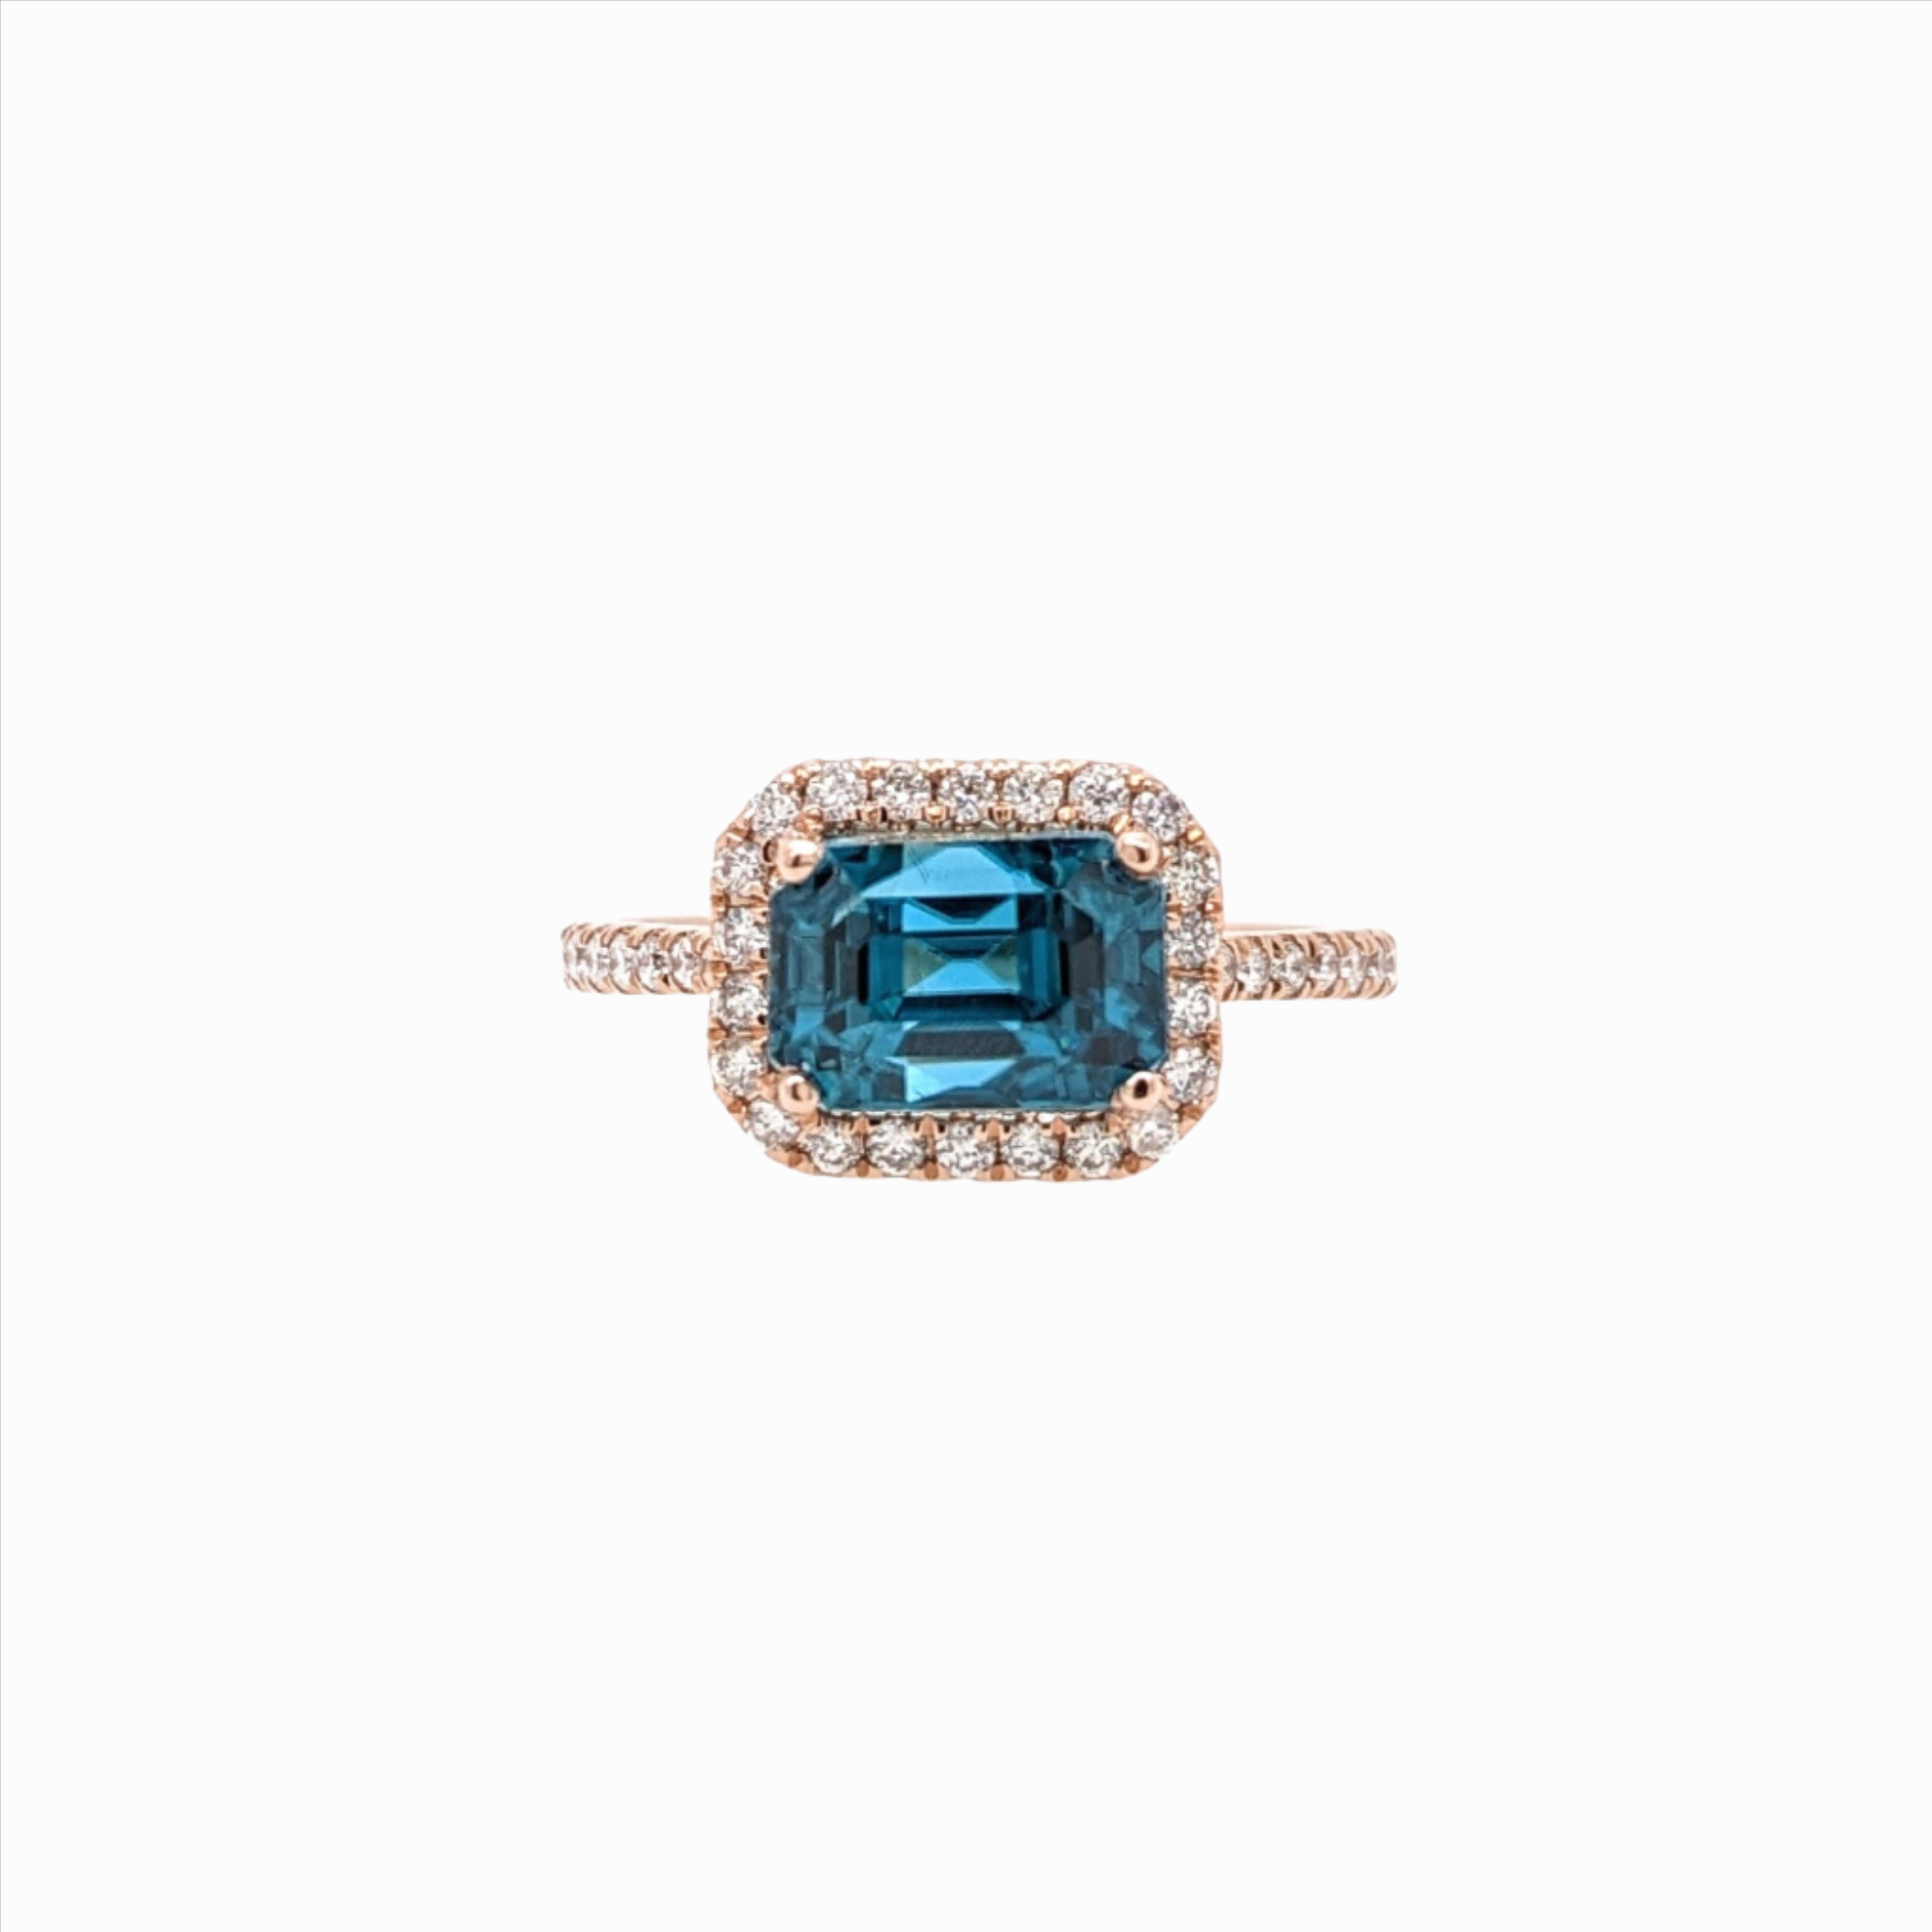 4.5ct Blue Zircon East West Ring w Natural Diamonds in Solid 14K Gold EM 8x6mm